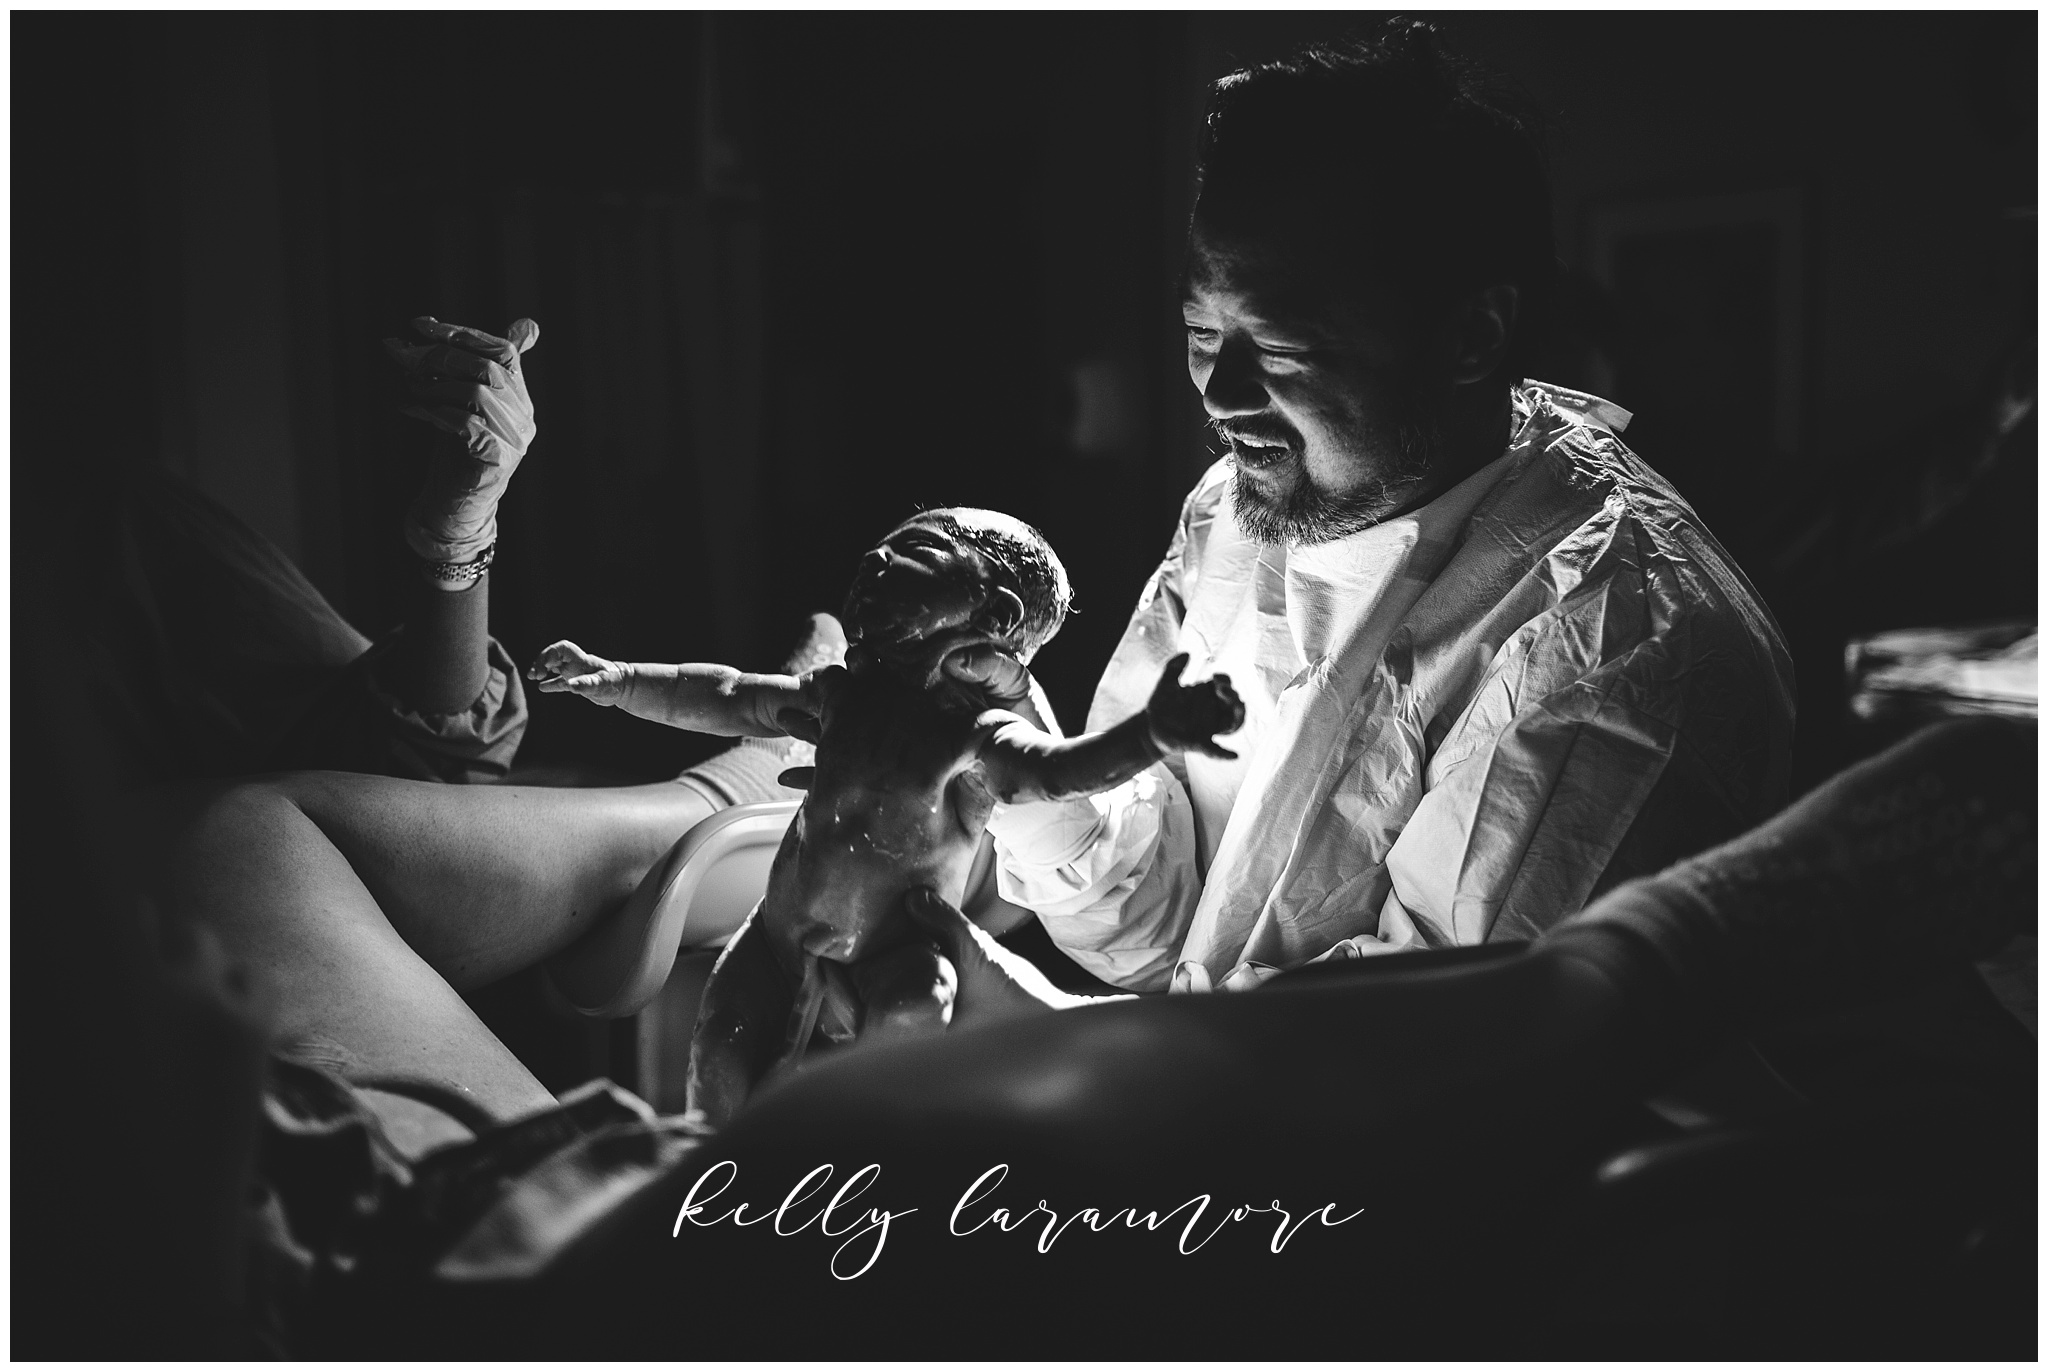 st louis birth story photographer, st louis family photographer, missouri baptist birth center-birth, delivery room, doctor holding up baby